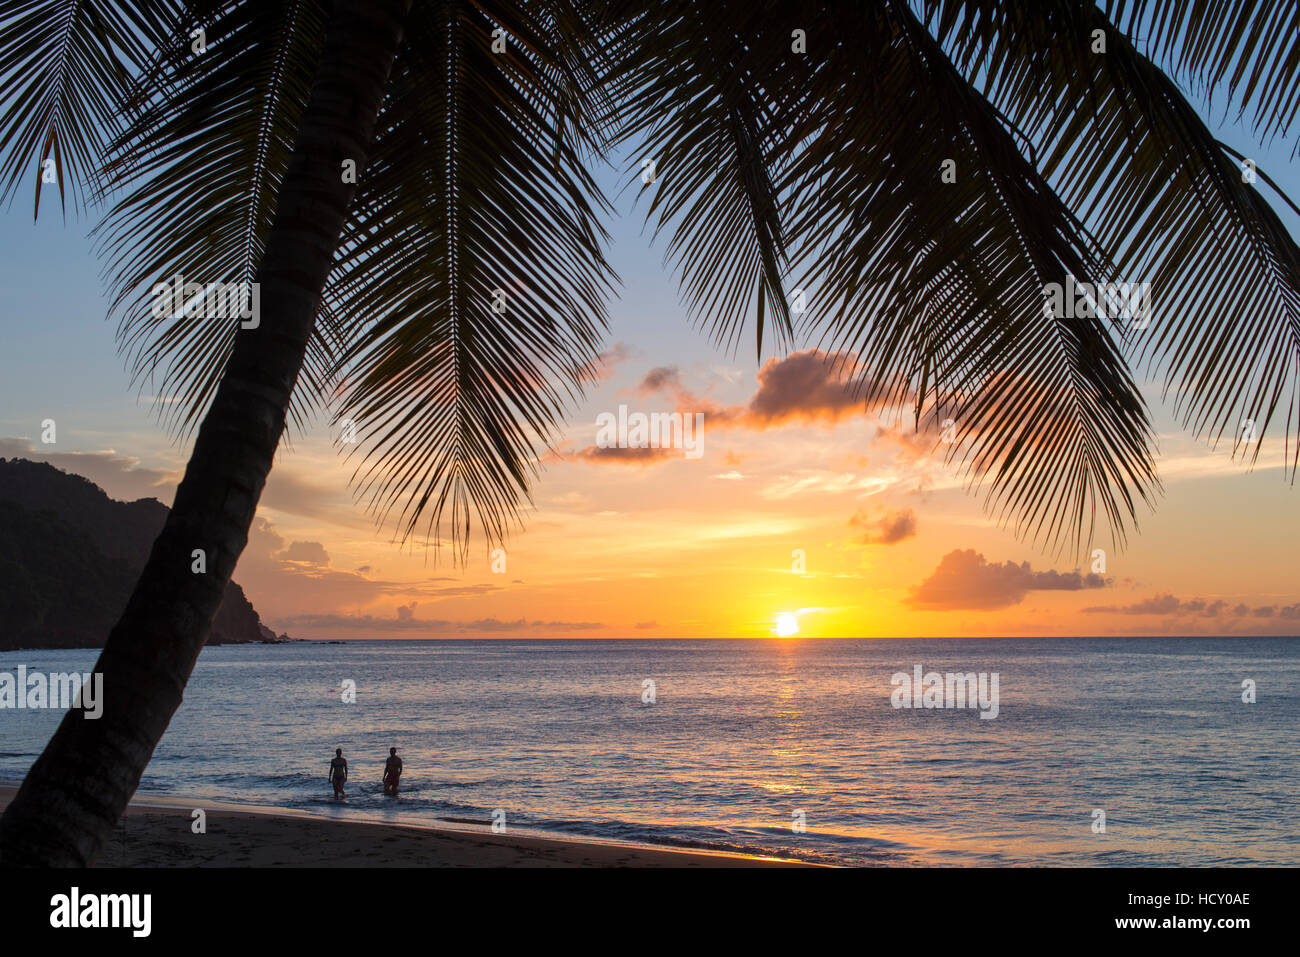 A view out to sea at sunset beneath the palm trees at Castara Bay in Tobago, Trinidad and Tobago, West Indies, Caribbean Stock Photo